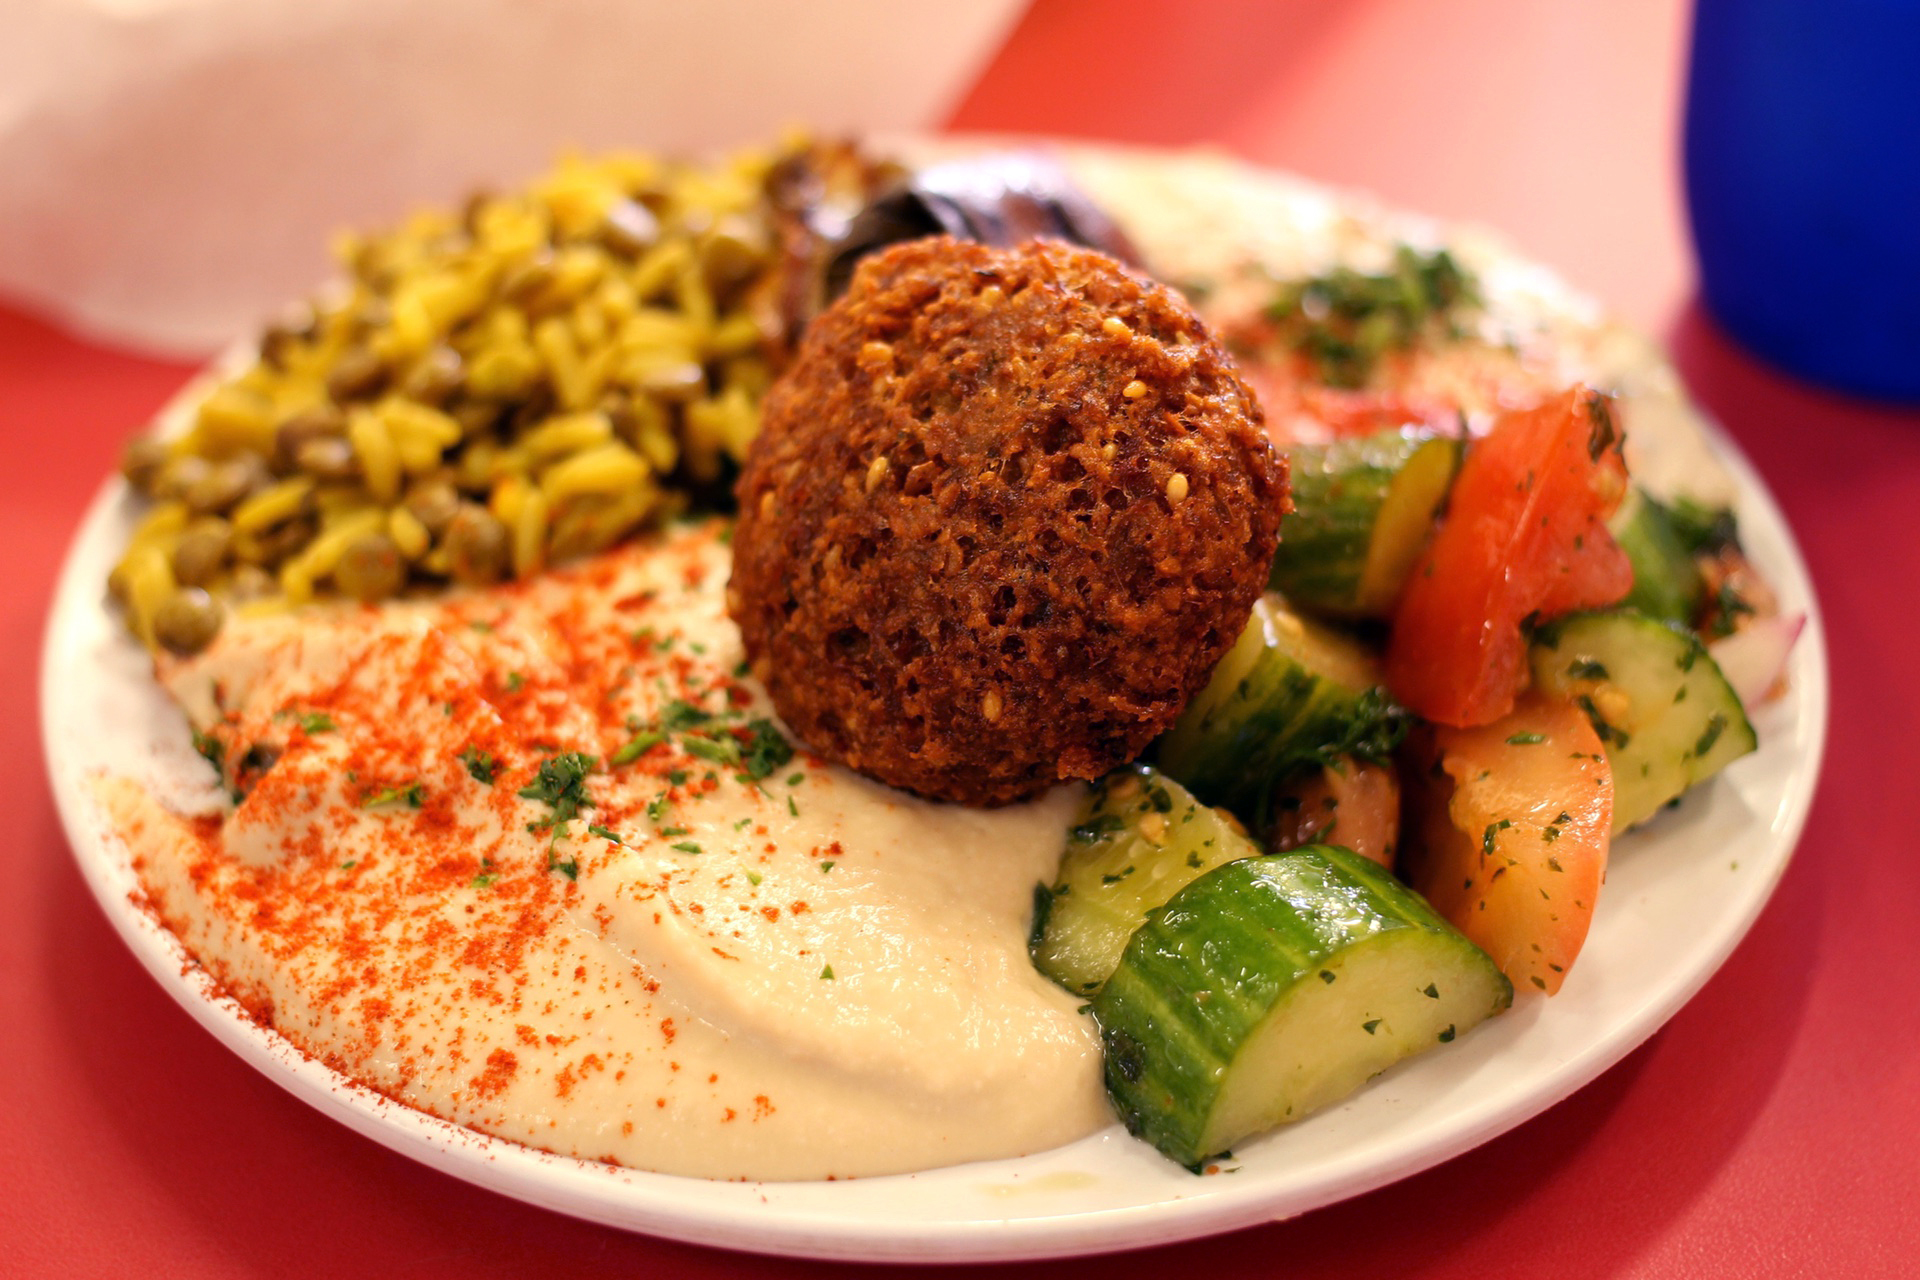 The vegetarian plate at Sunrise Deli in San Francisco includes falafel, hummus, cucumber salad, one dolma, lentils and rice.